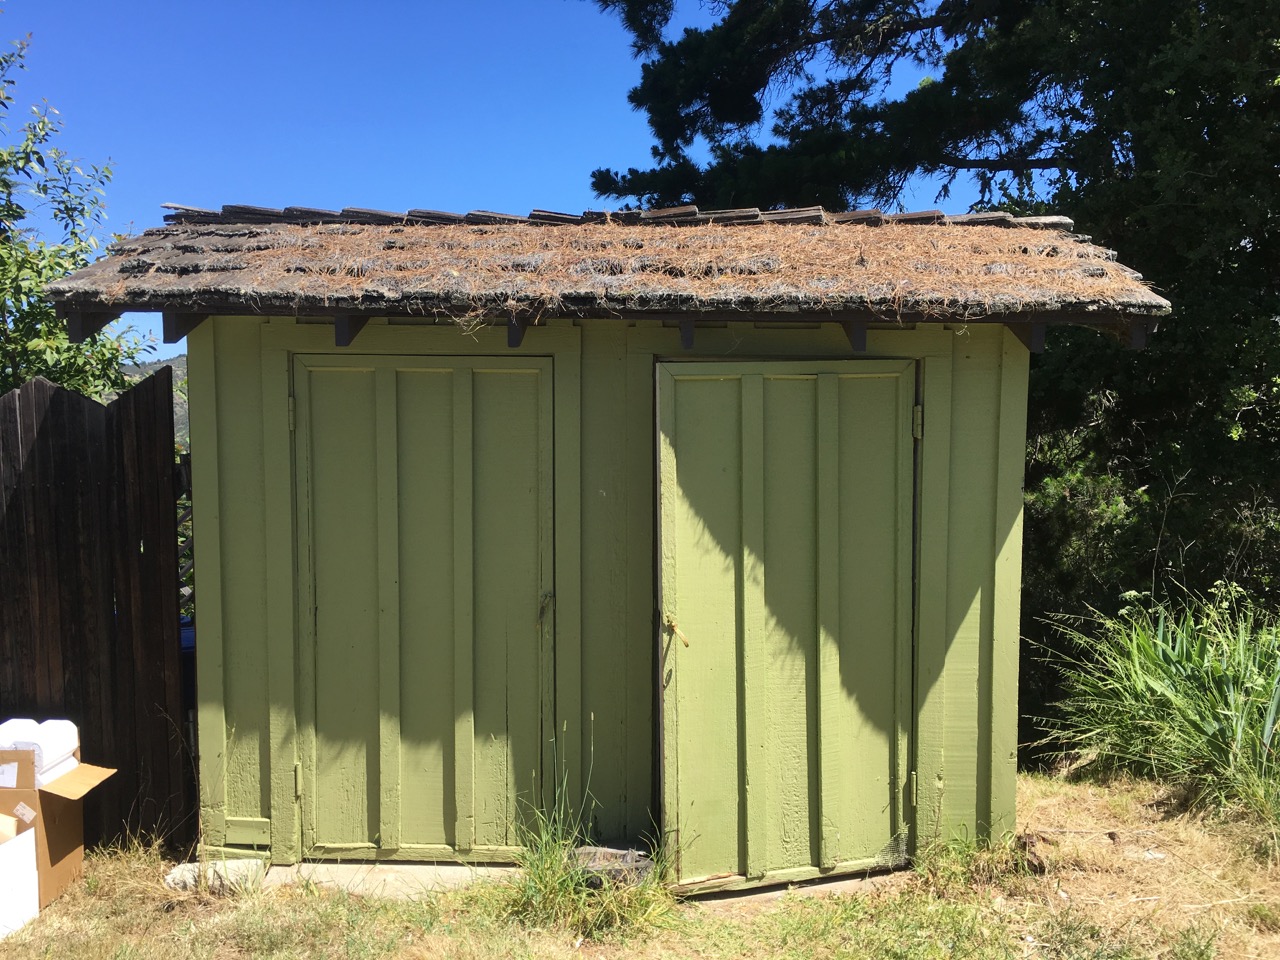 Existing shed to match